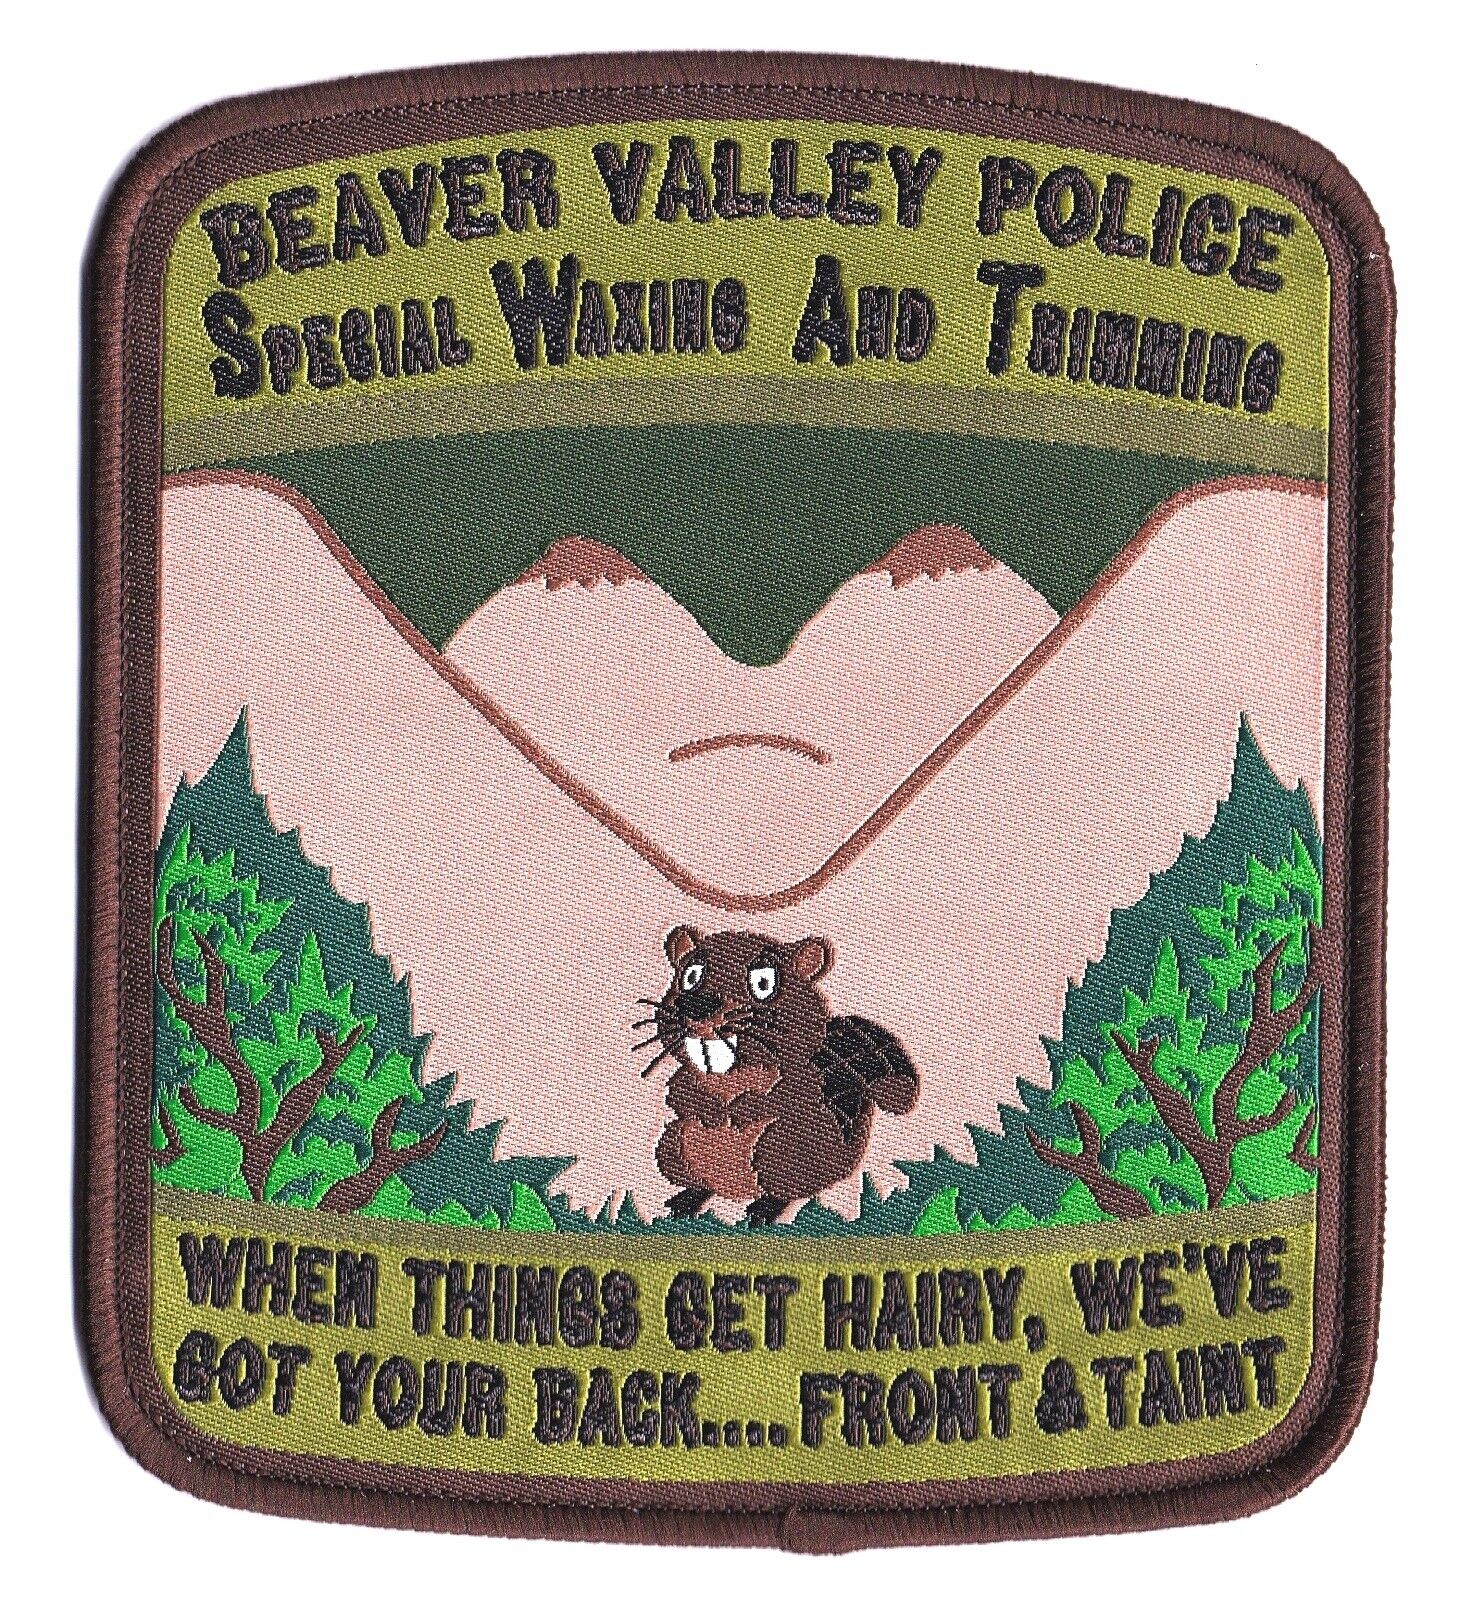 NEW STYLE  BEAVER VALLEY POLICE  SWAT  SERT   SUBDUED  PA  PENNSYLVANIA  NOVELTY